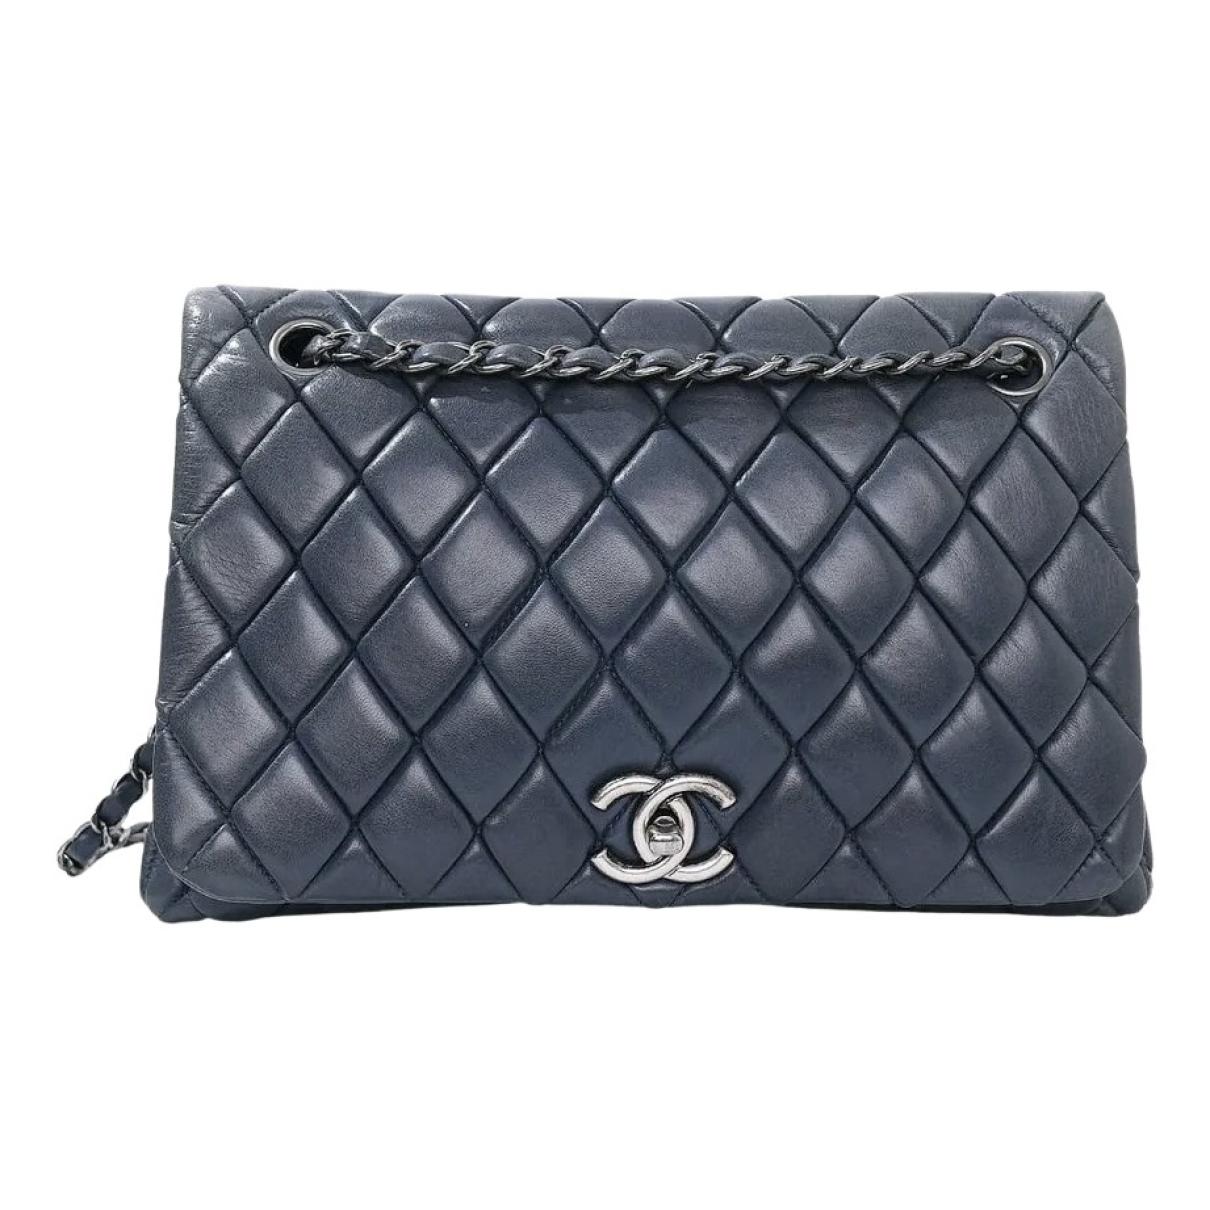 Timeless/classique leather handbag Chanel Blue in Leather - 17670291